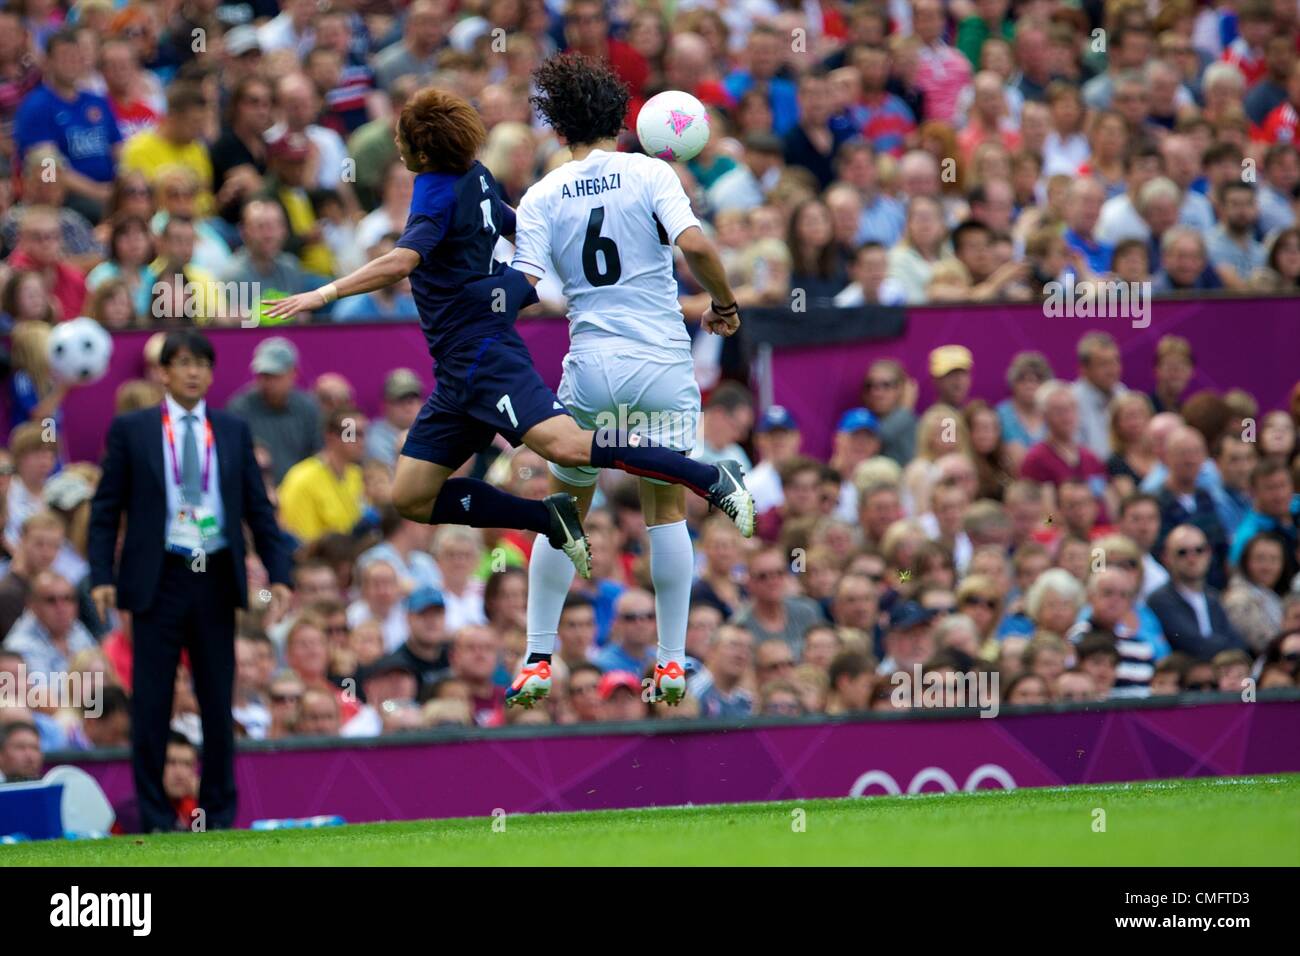 UK. 04.08.2012 Manchester, England. Egypt defender Ahmed Hegazy and Japan forward Yuki Otsu in action during the quarter final match between Japan and Egypt at Old Trafford. Japan won the game by a score of 3-0 to proceed to the tournament semi-finals. Stock Photo